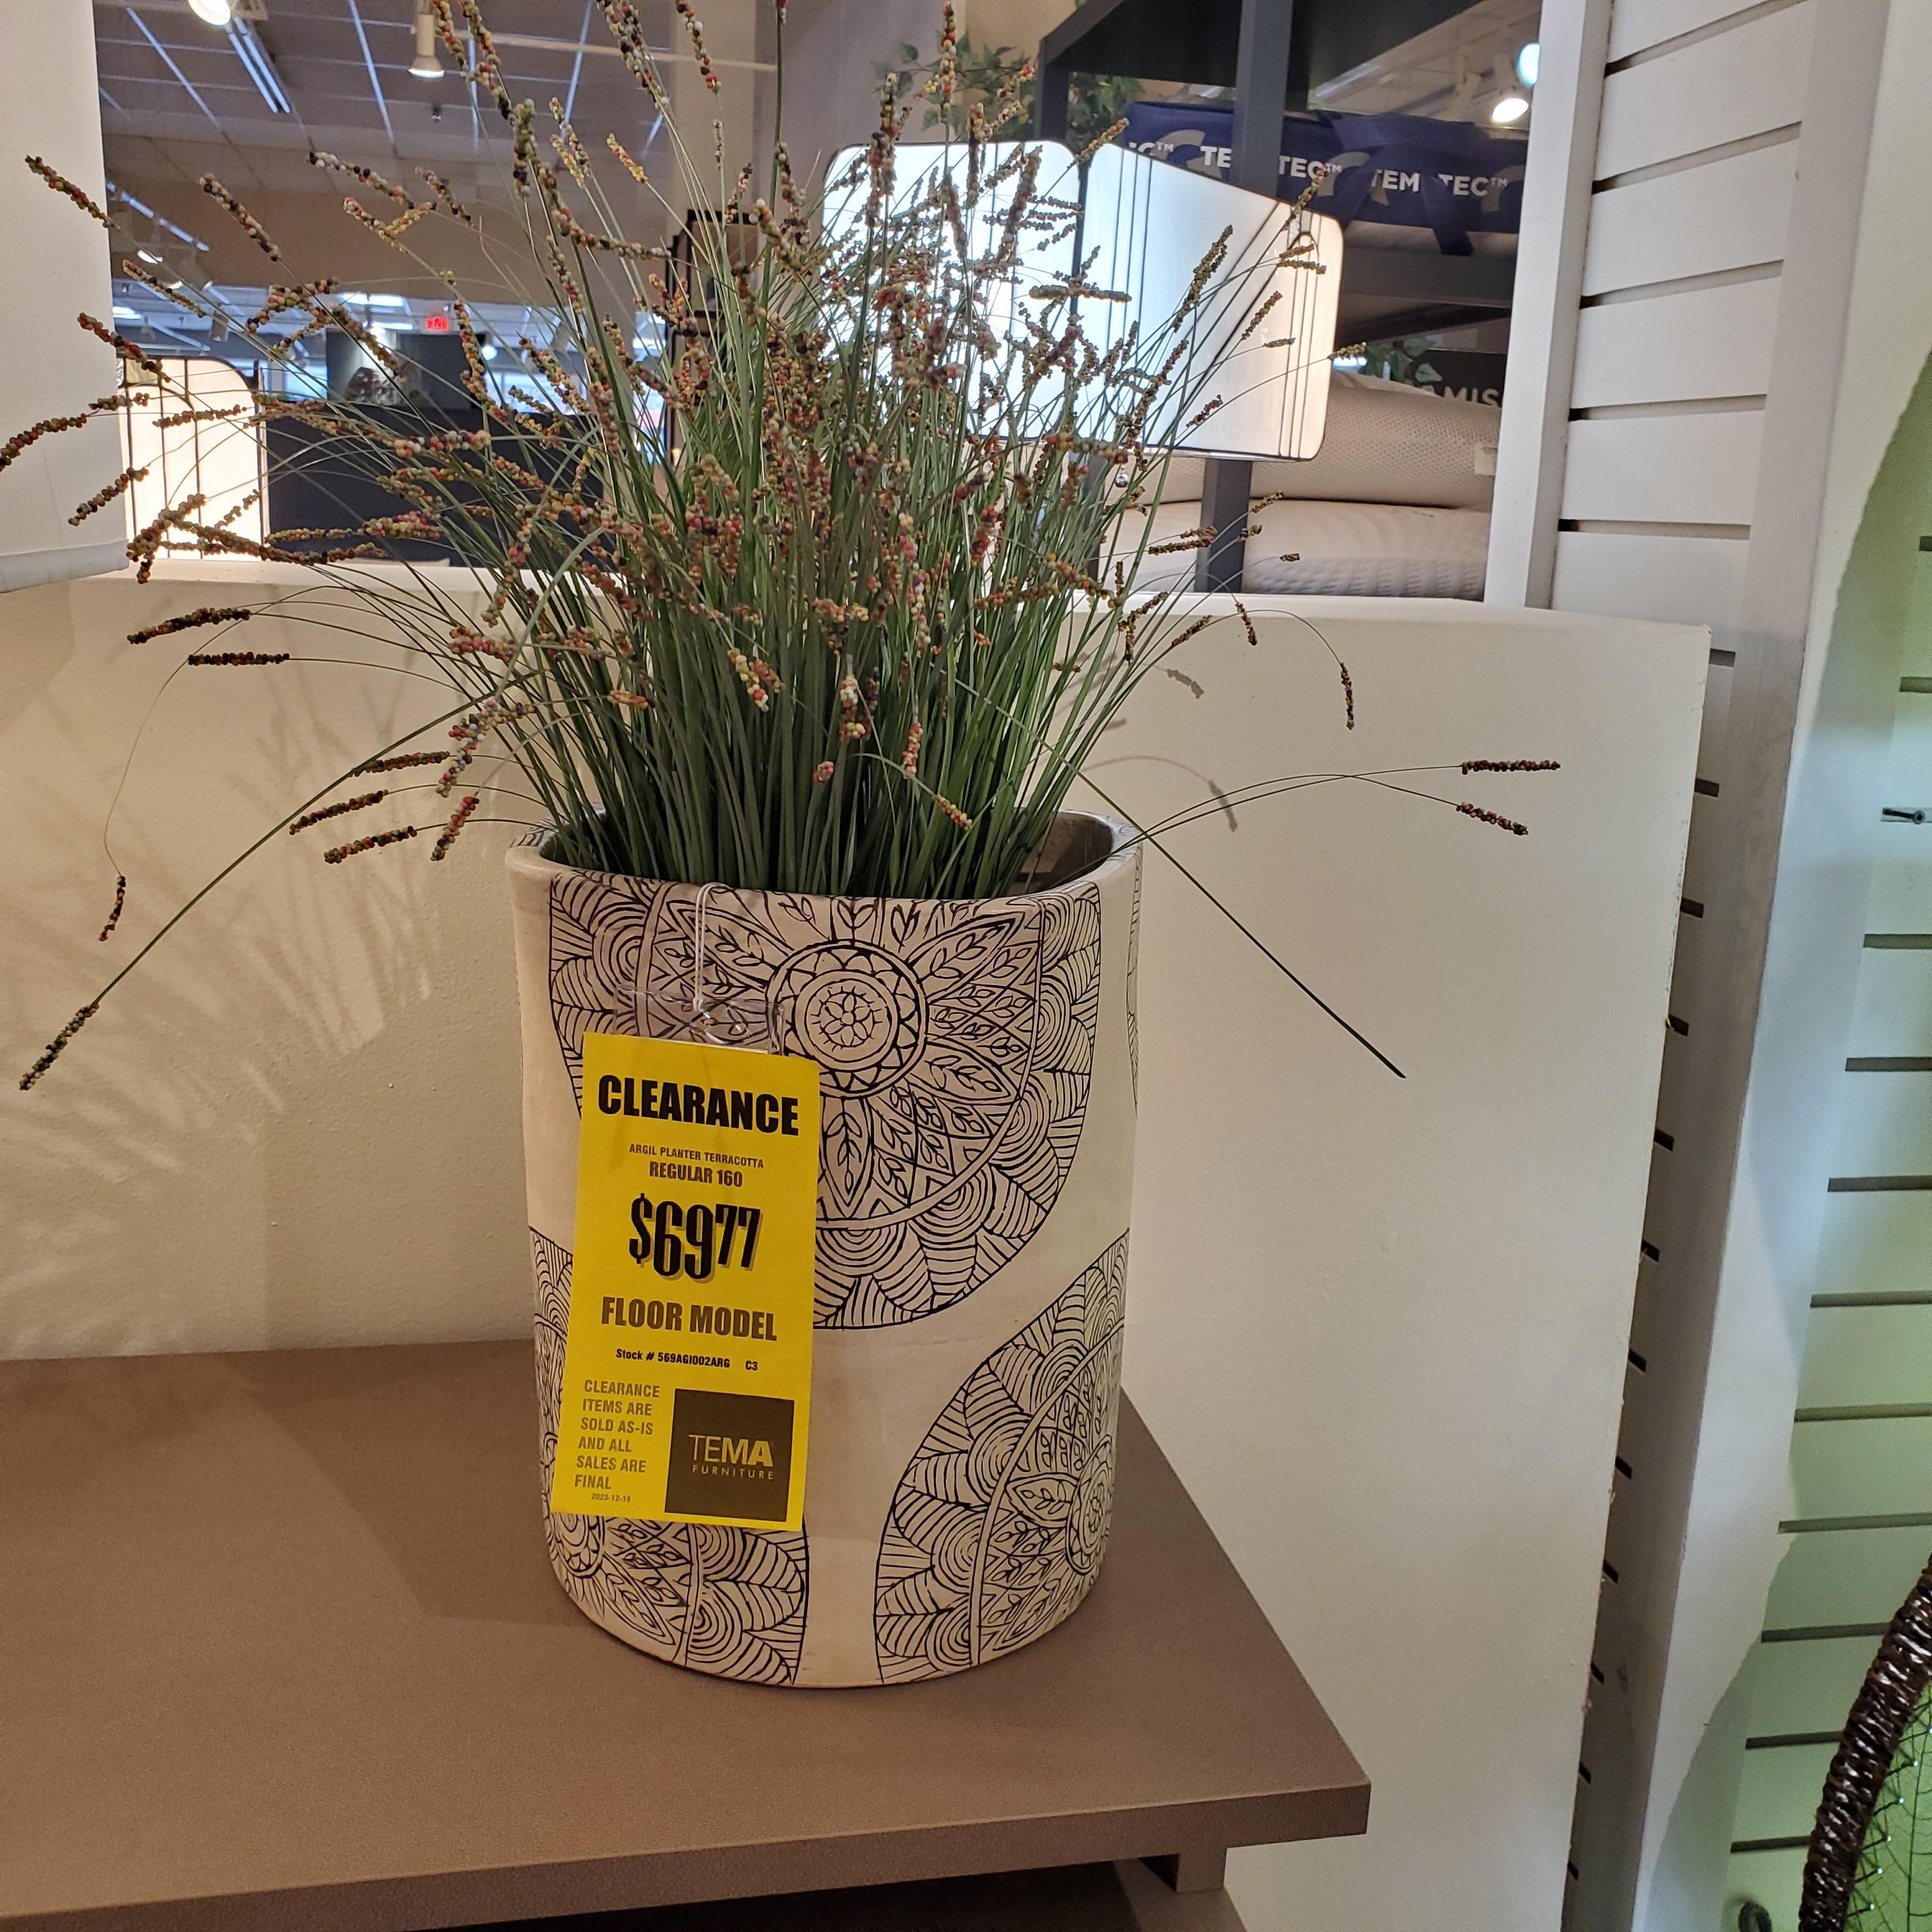 Argil Planter Front View Image in Showroom